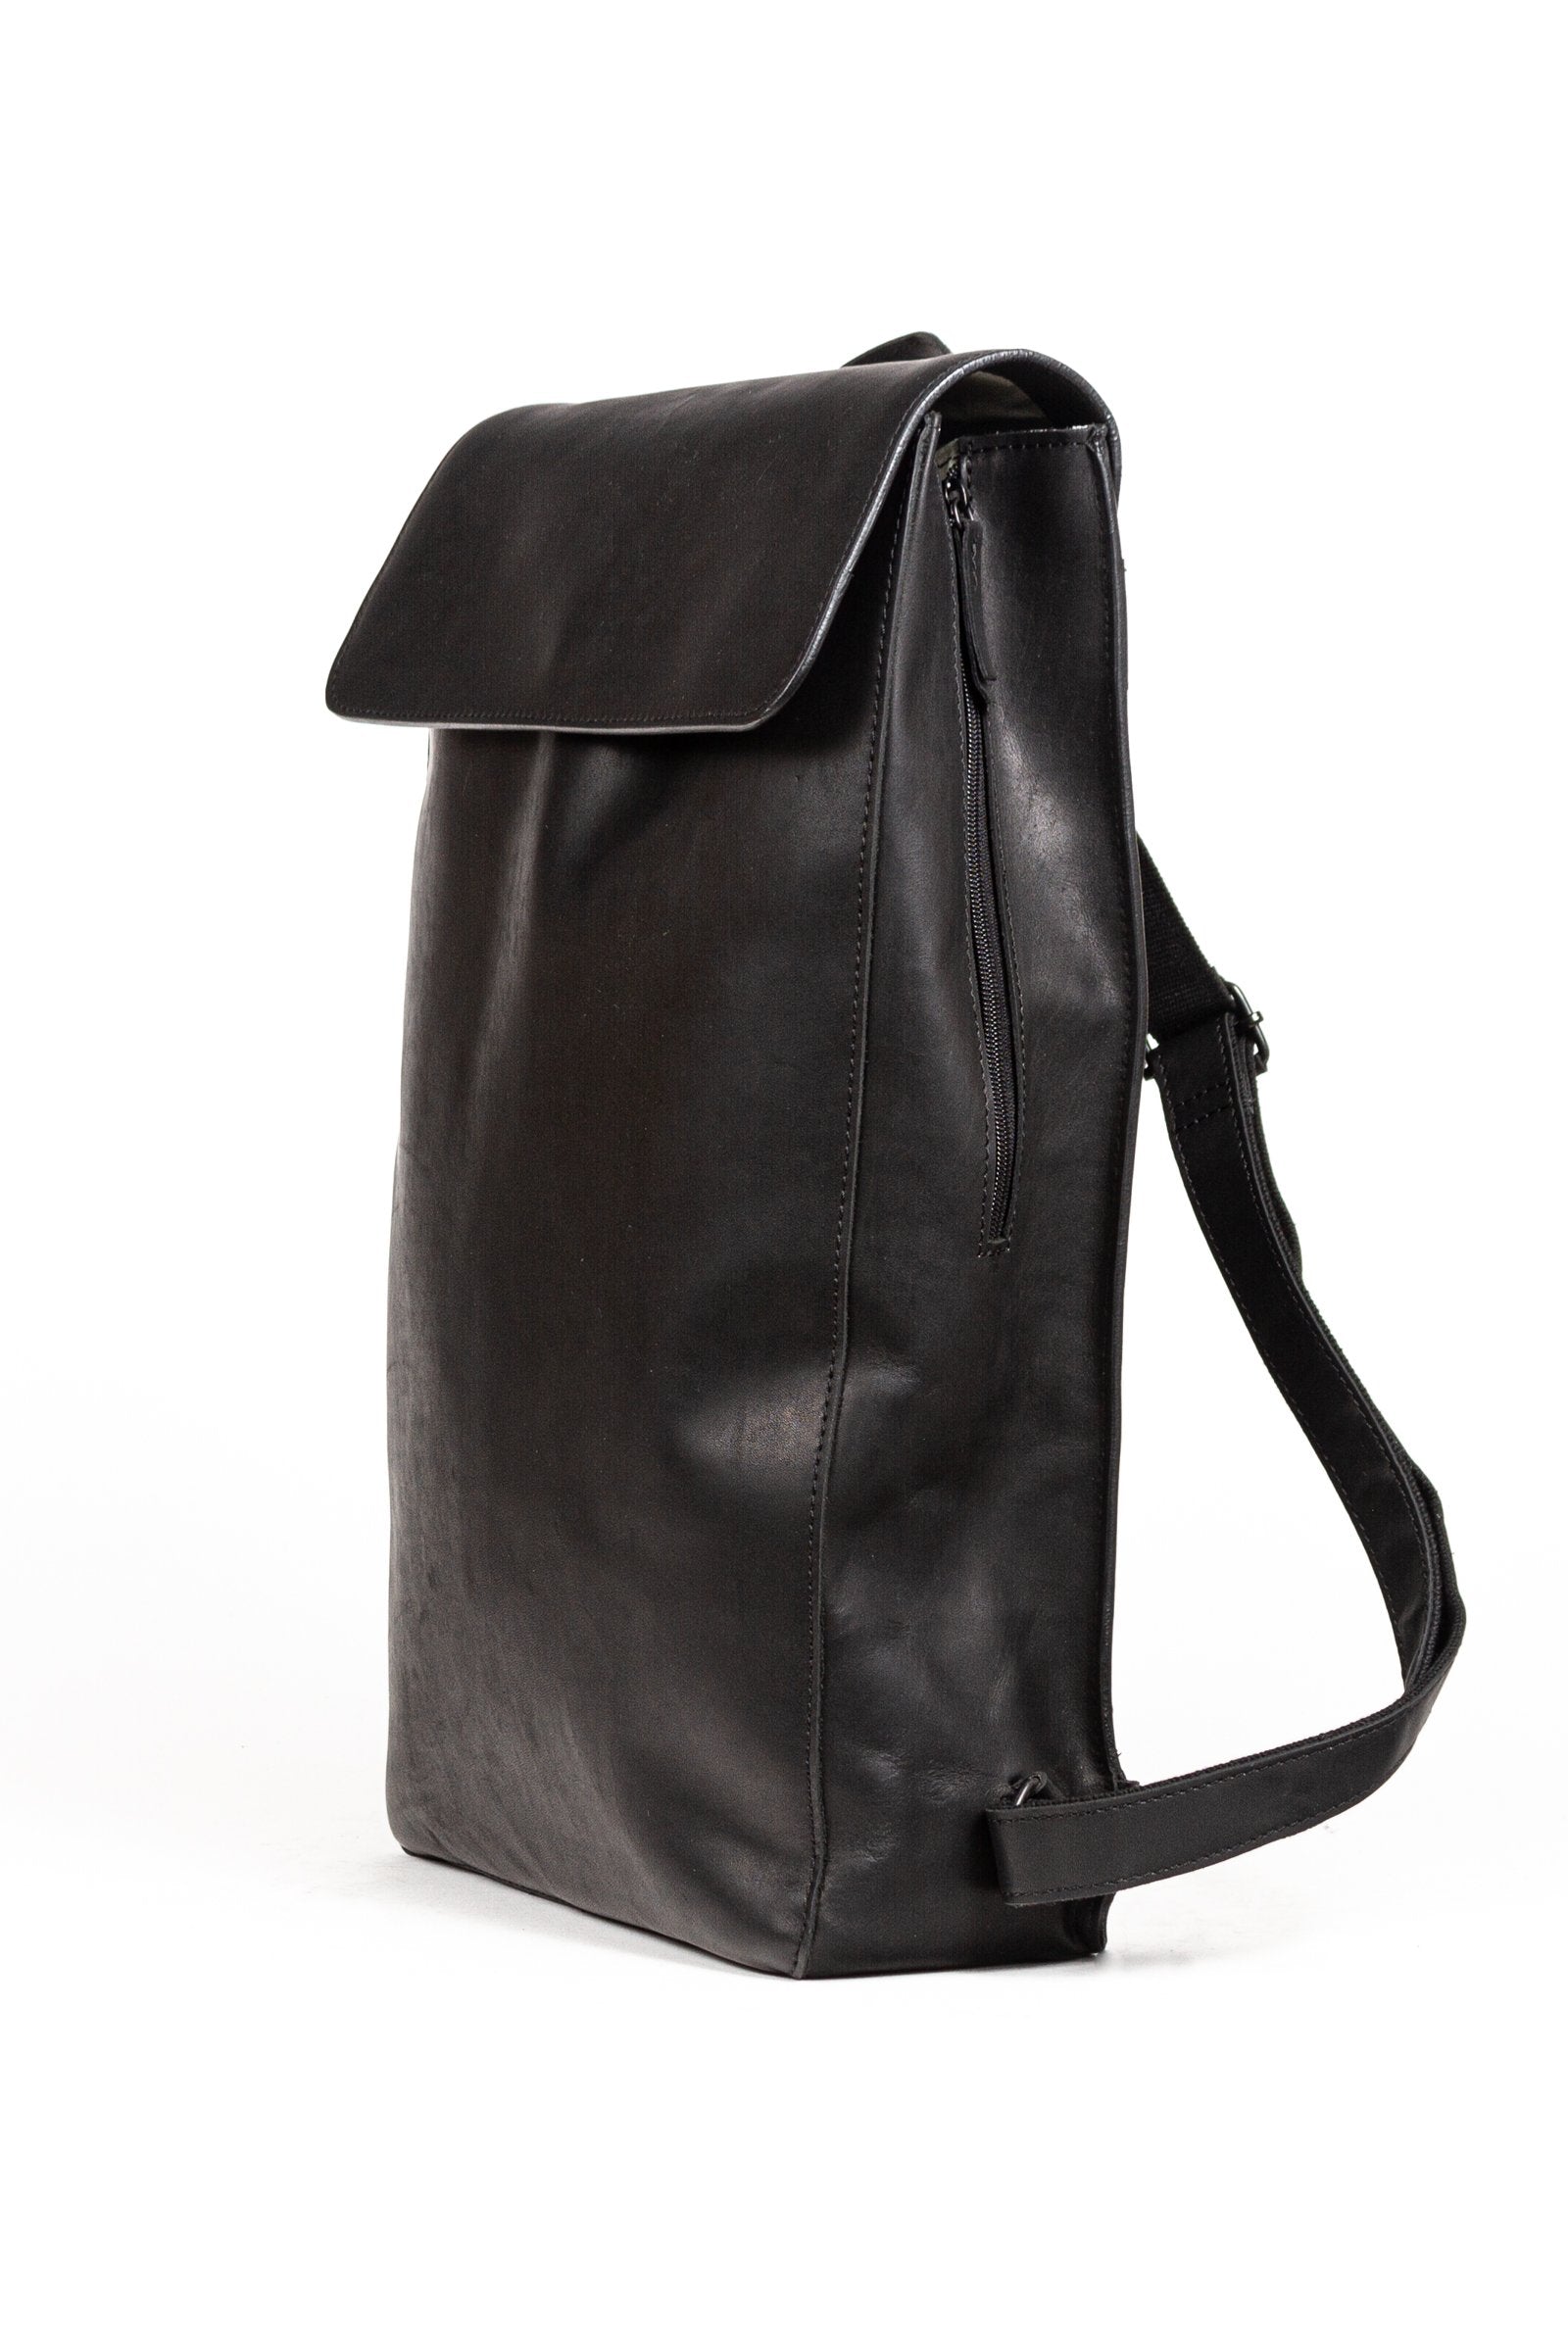 BEON.COM.AU The Jost Futura Long Line Backpack is a leather bag made in Europe from premium European leathers and fabrics. 1 main compartment, inner compartment with zipper 13" Laptop, 1 portrait wide folder, outer compartment with zipper Backstrap adjustable and removable 47cm x 28cm x 8cm 8.42L volume... Jost at BEON.COM.AU